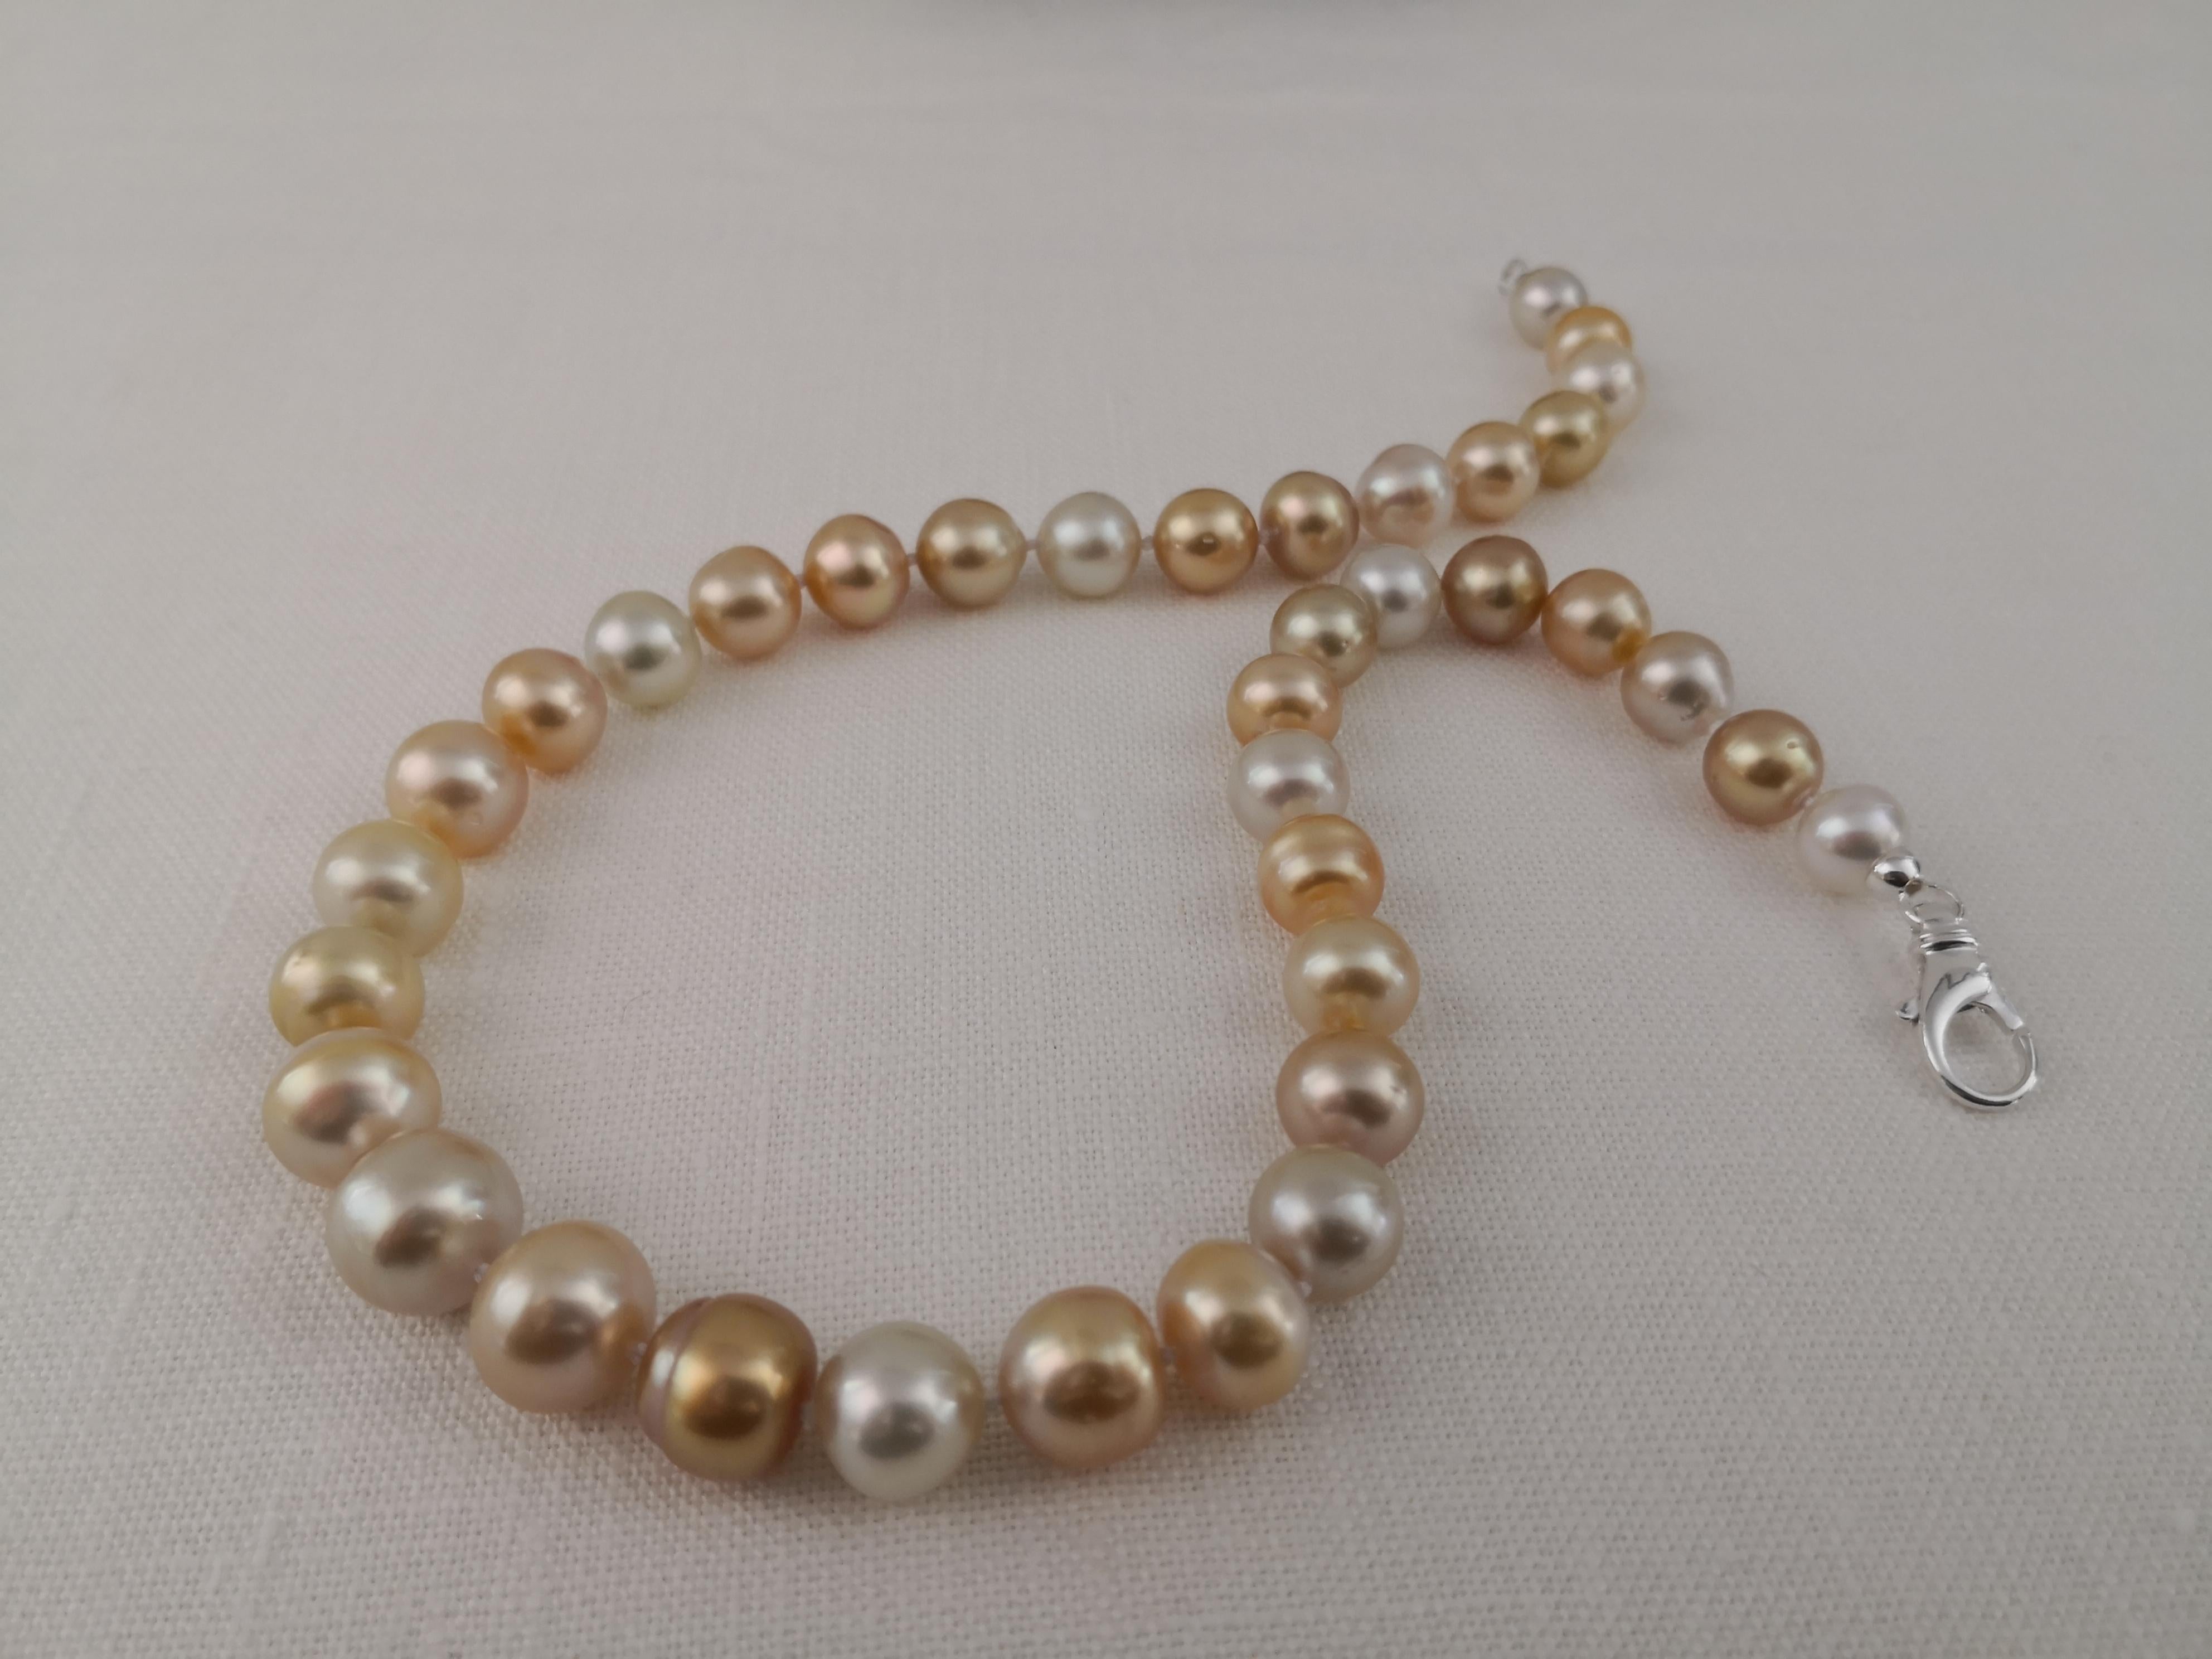 A Natural Color South Sea Pearls, from ocean waters.

- Size of Pearls 11-14 mm of diameter

- Pearls from Pinctada Maxima Oyster

- Origin: Indonesia ocean waters

- Natural multicolor White,  Cream, Golden, Champaign and mixed overtones

- High